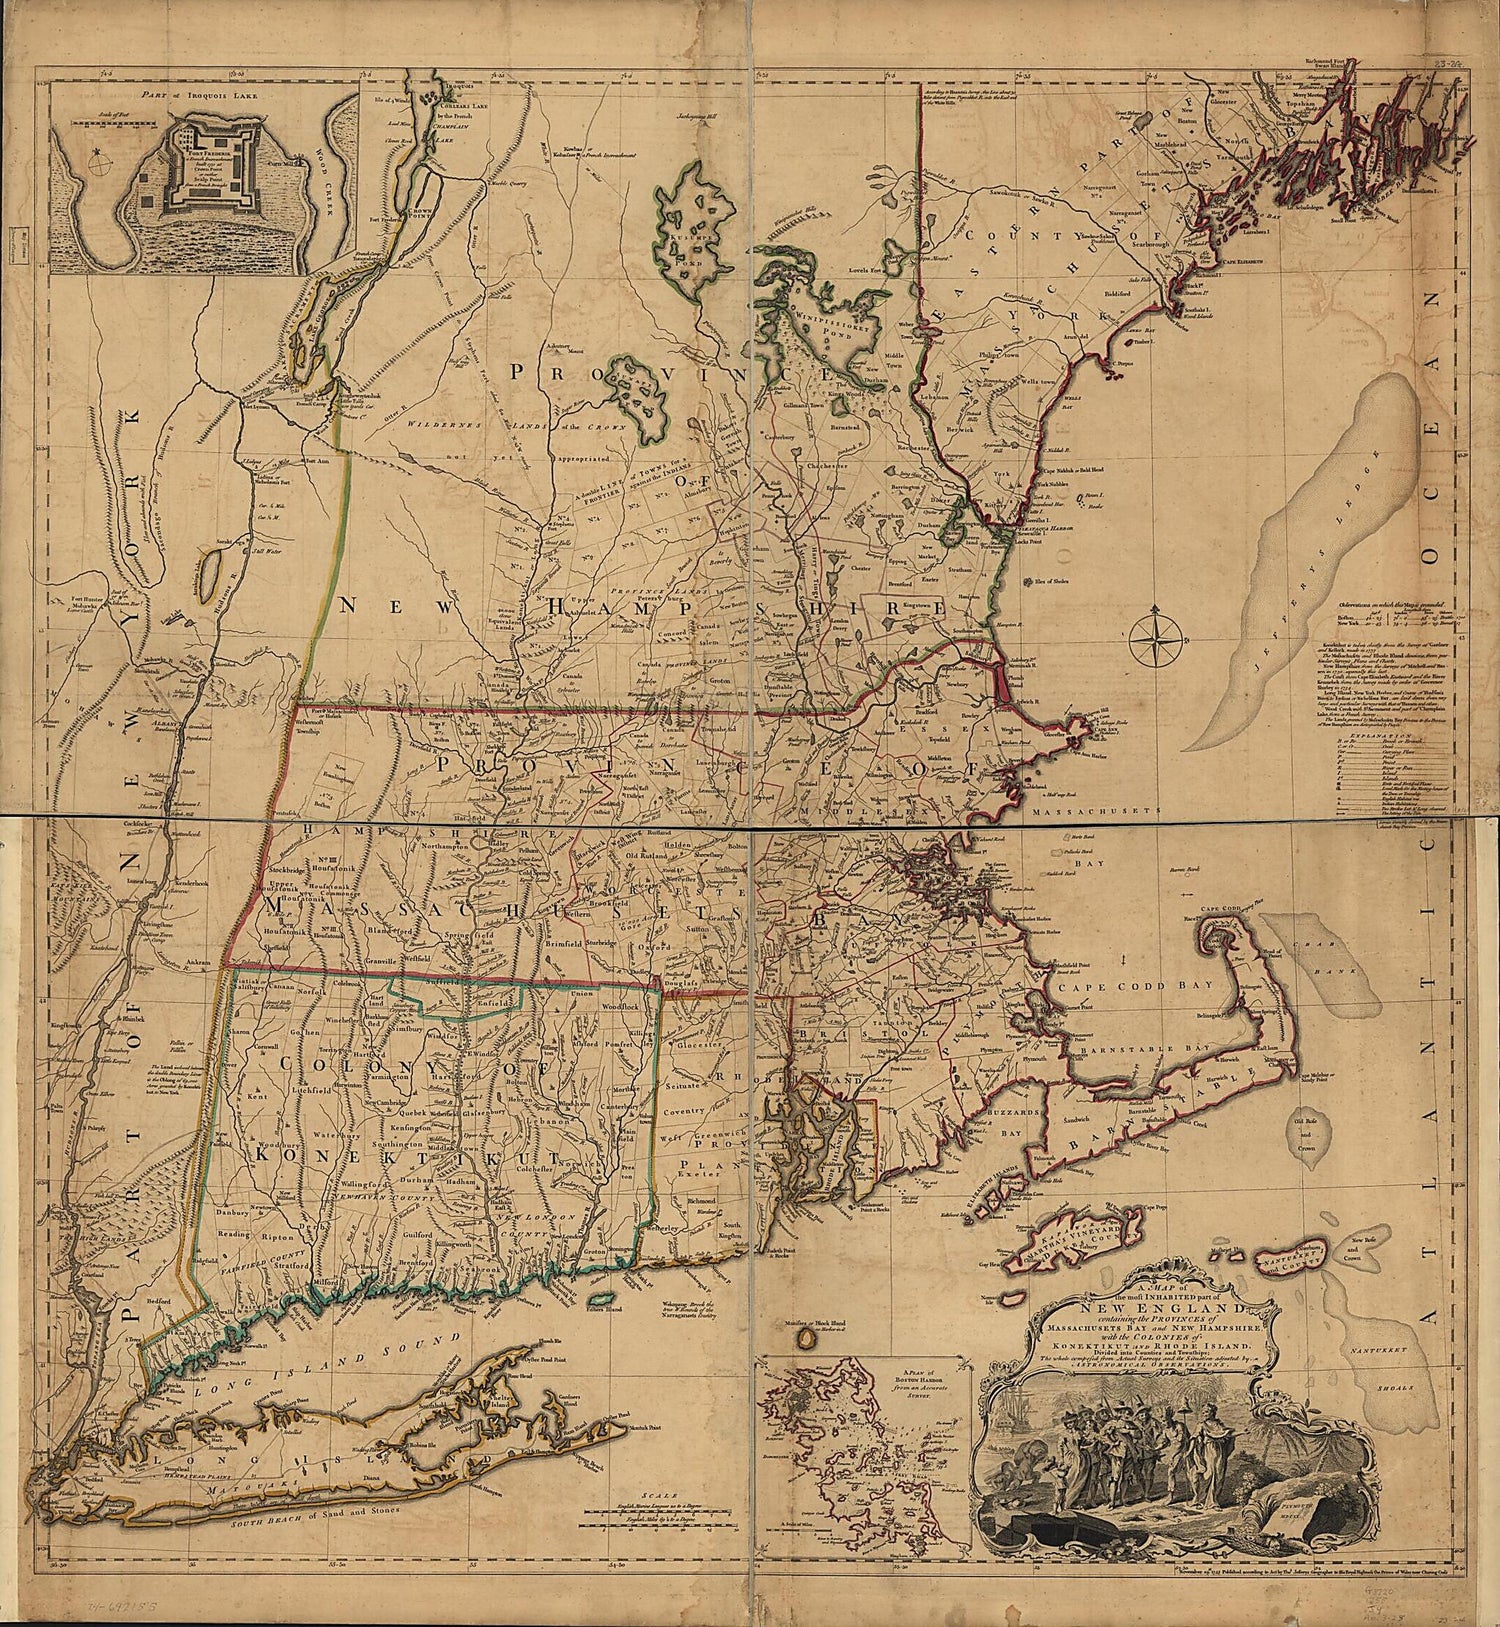 This old map of A Map of the Most Inhabited Part of New England : Containing the Provinces of Massachusets Bay and New Hampshire, With the Colonies of KoneKtikut and Rhode Island, Divided Into Counties and Townships : the Whole Composed from Actual Surve